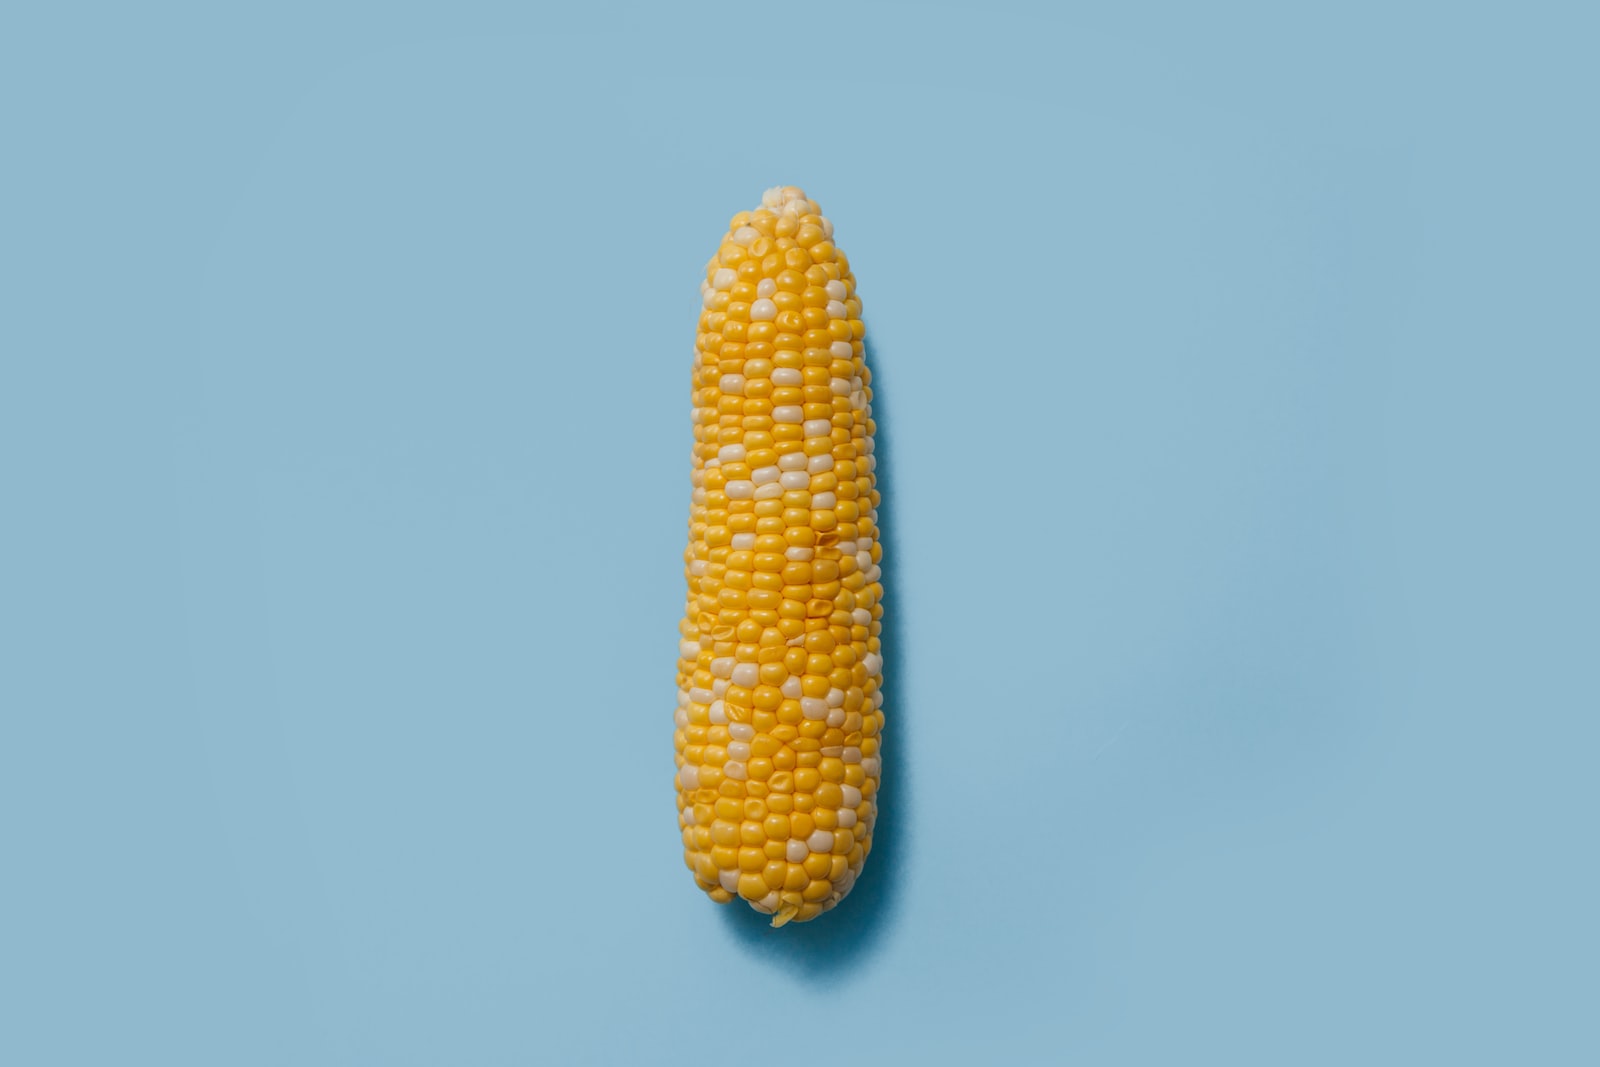 How Long Does Corn Take To Digest?